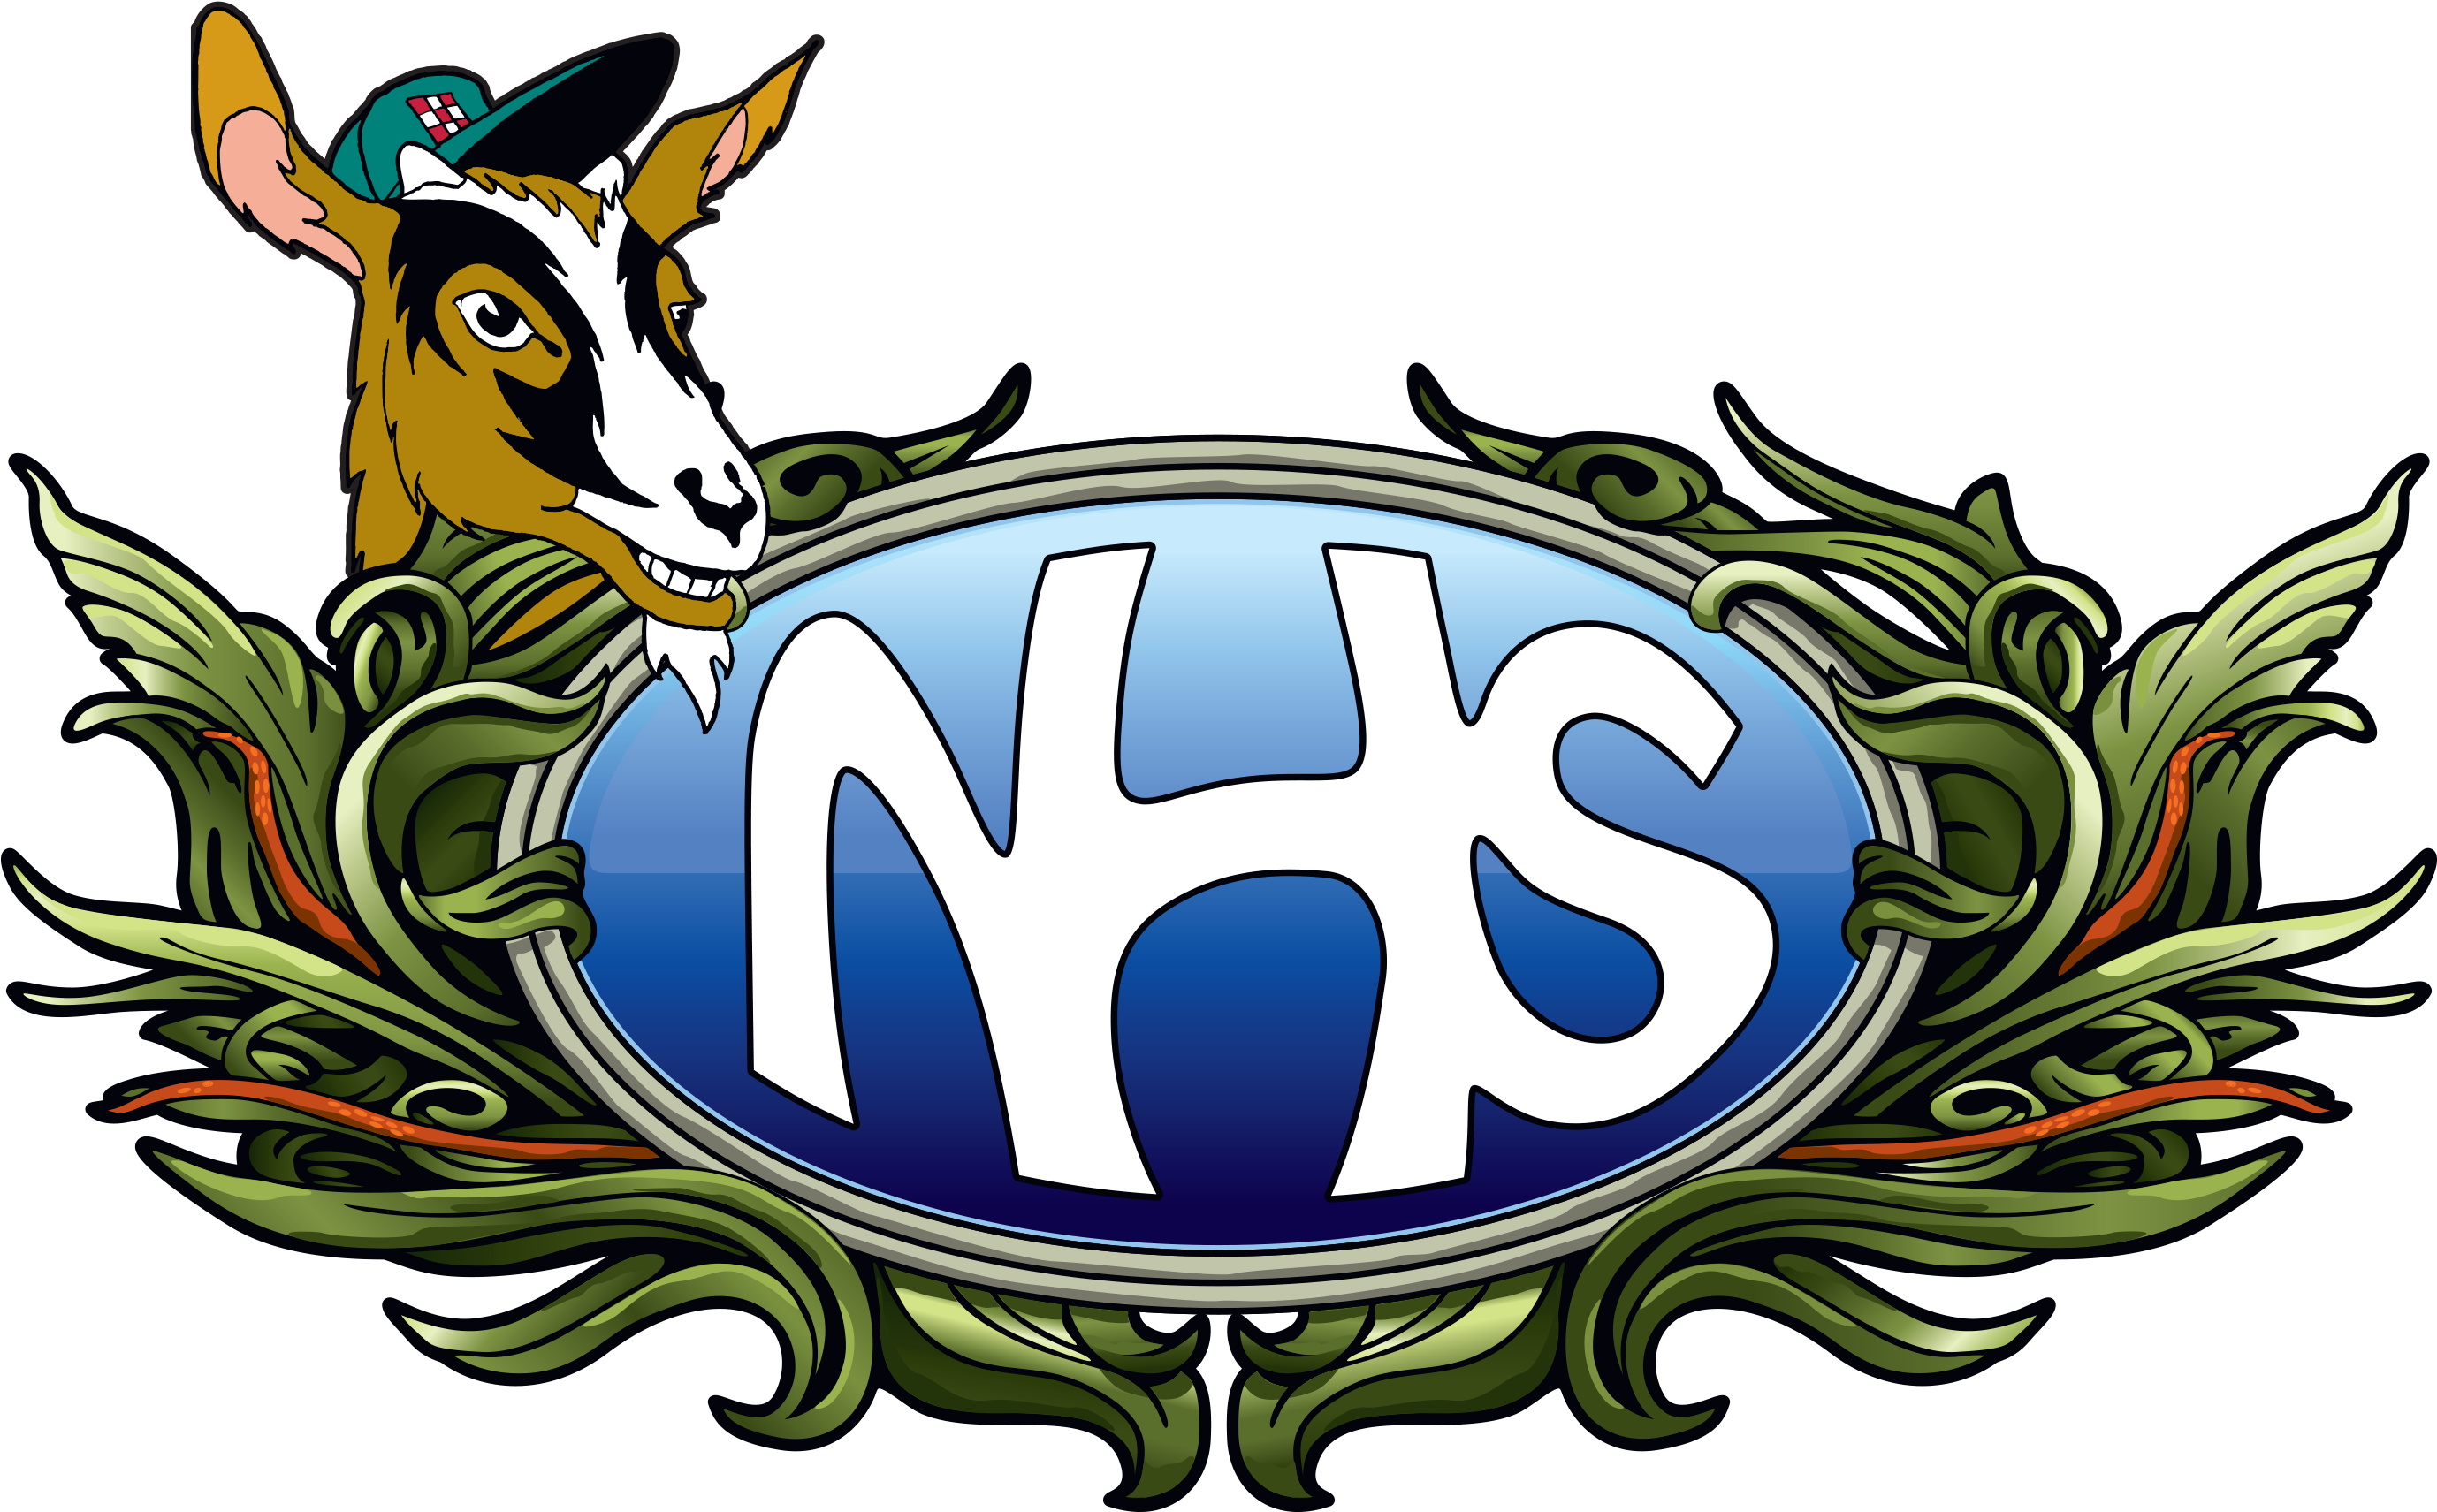 Nhs Goat Logo Fin 002 - Northcoast Horticulture Supply (2964x1915)